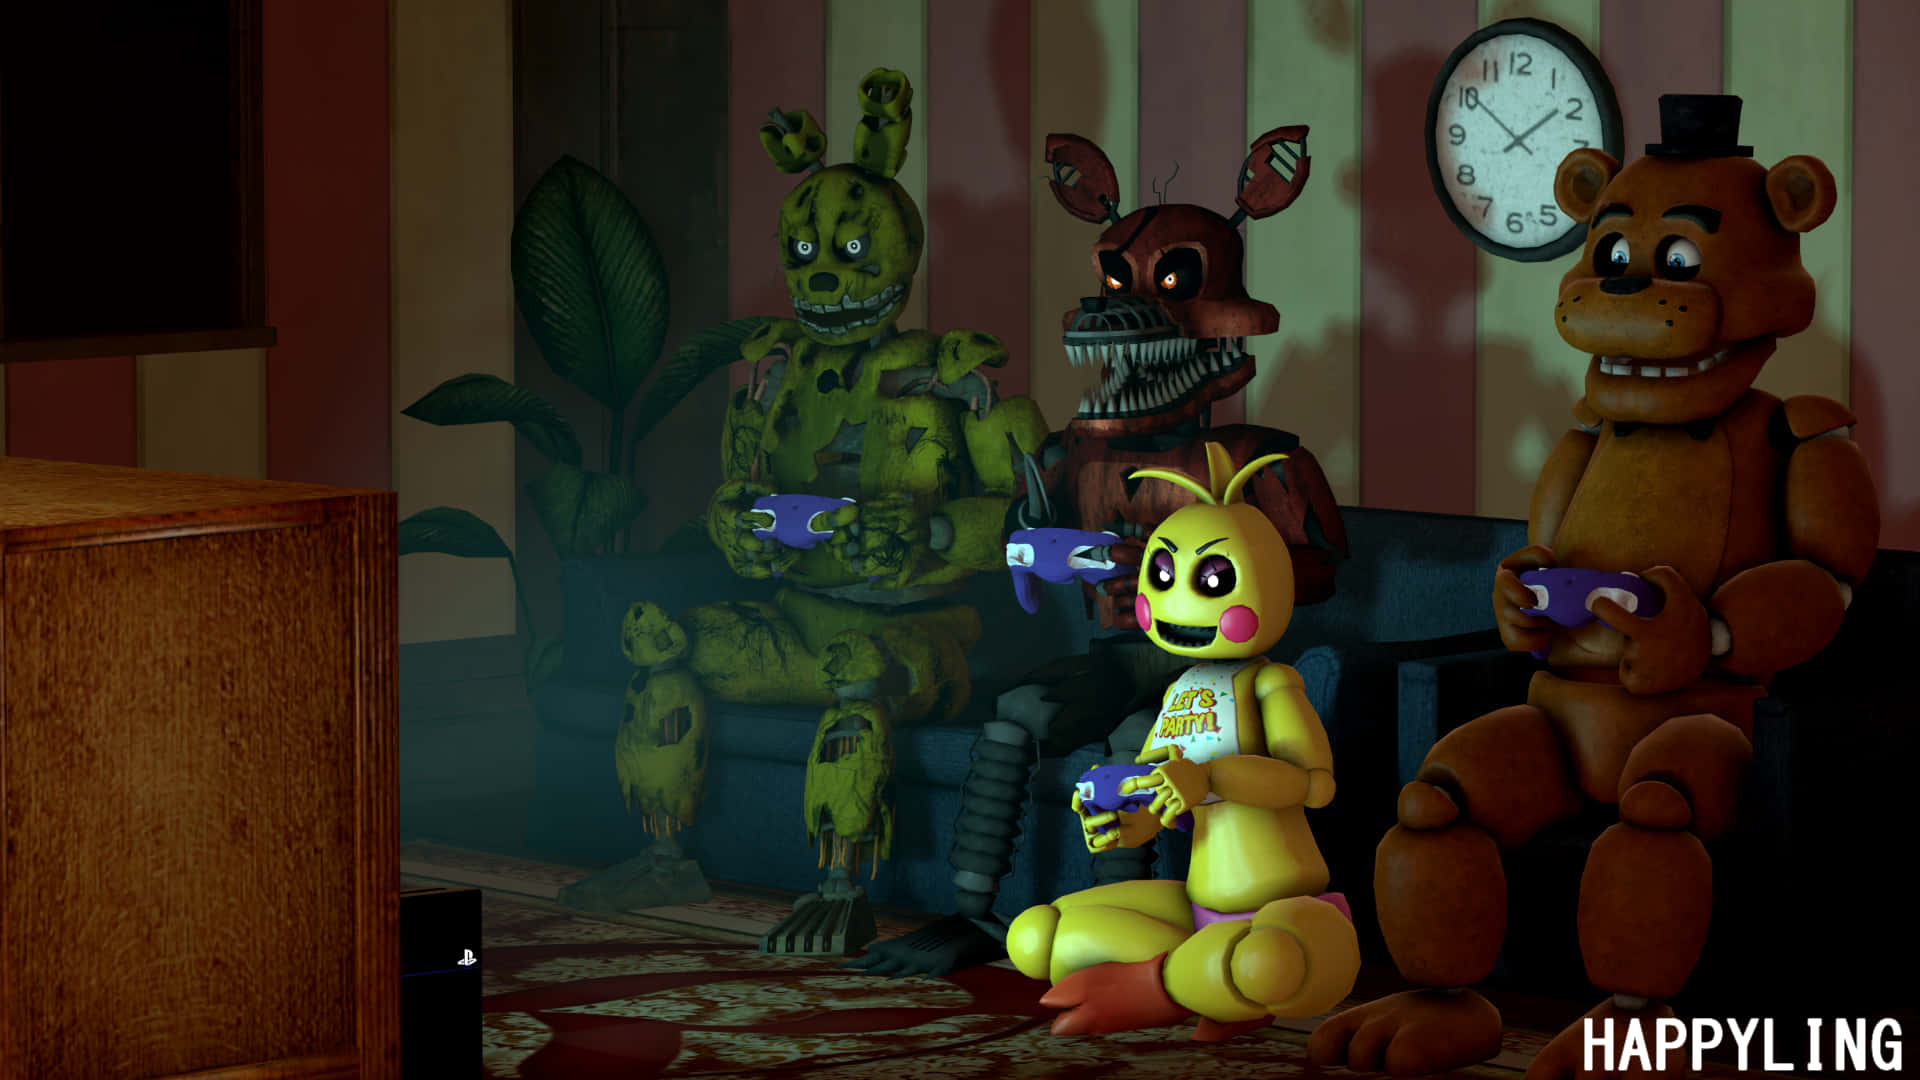 The horror awaits in Five Nights At Freddys Wallpaper